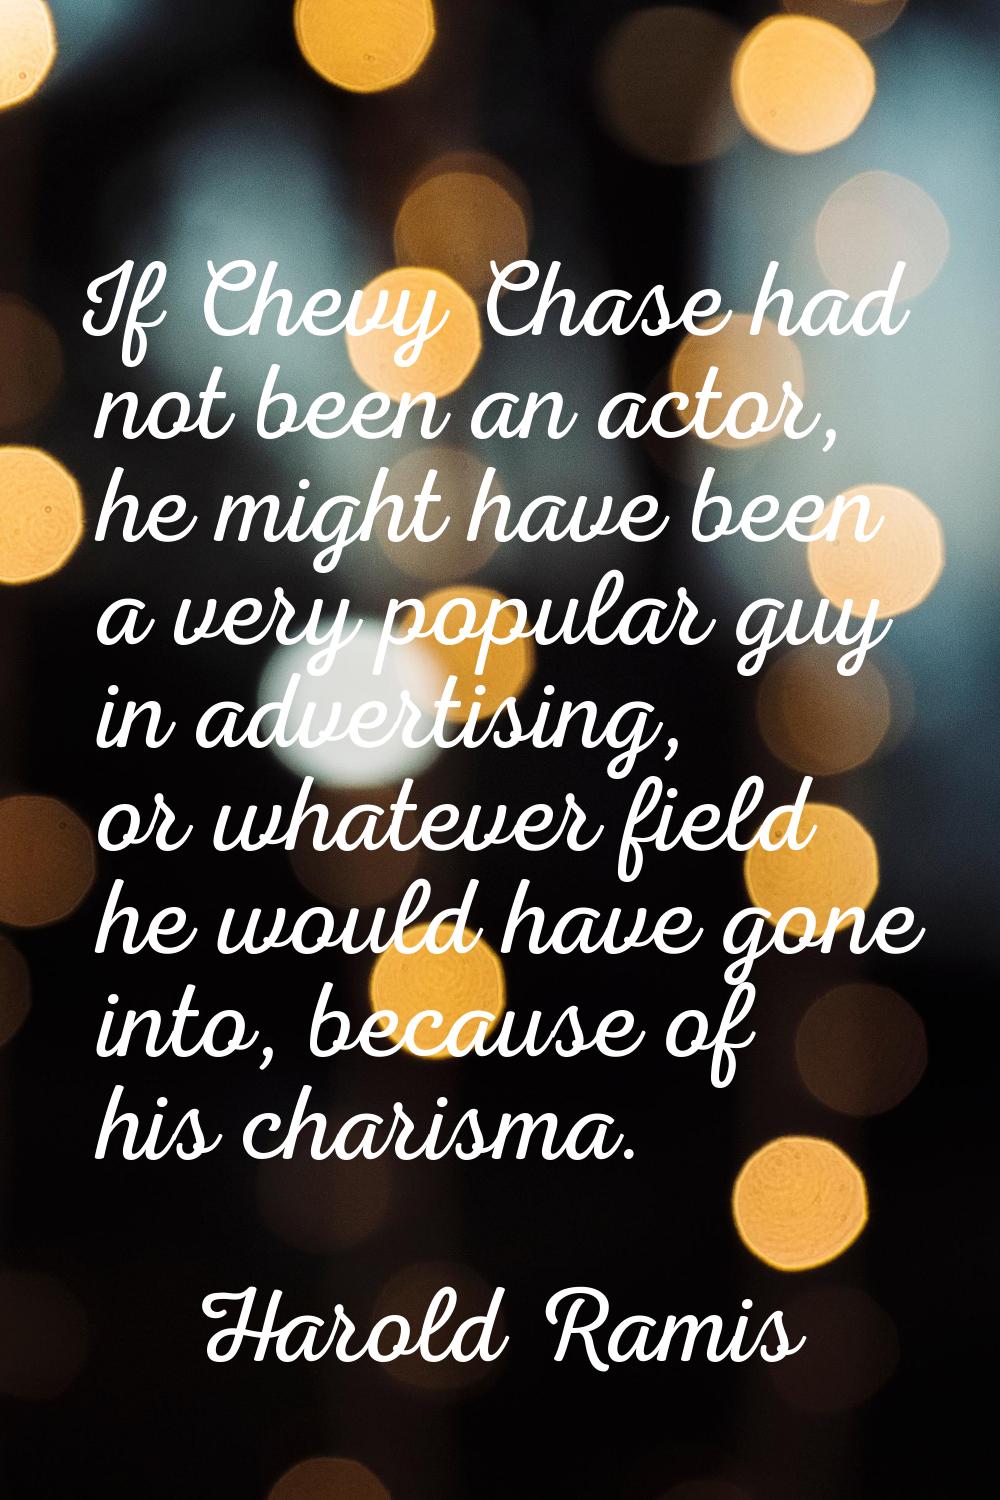 If Chevy Chase had not been an actor, he might have been a very popular guy in advertising, or what